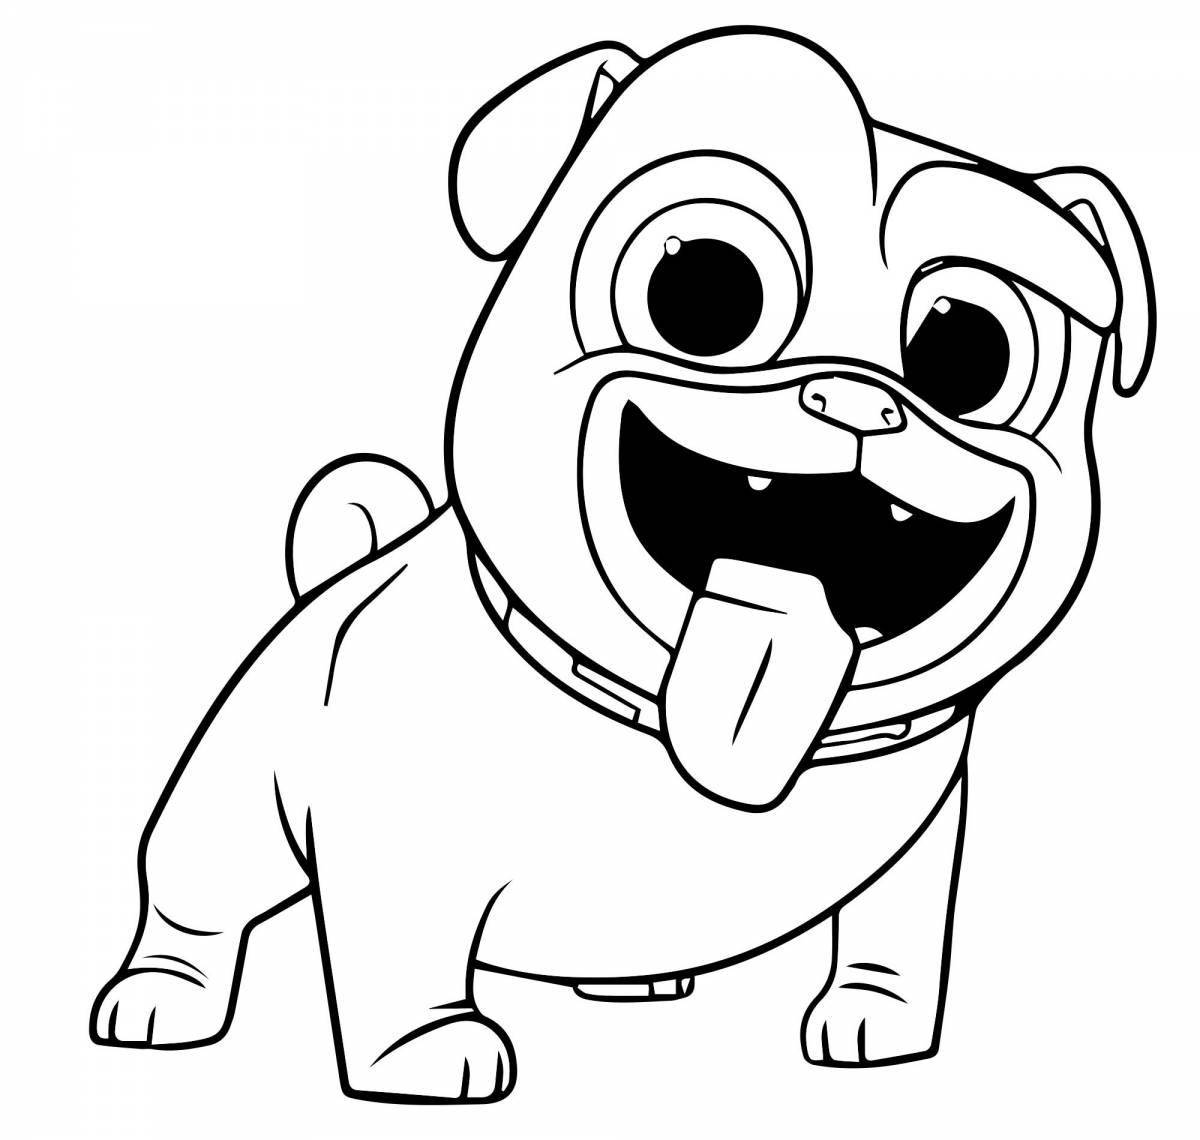 Pug coloring page for kids